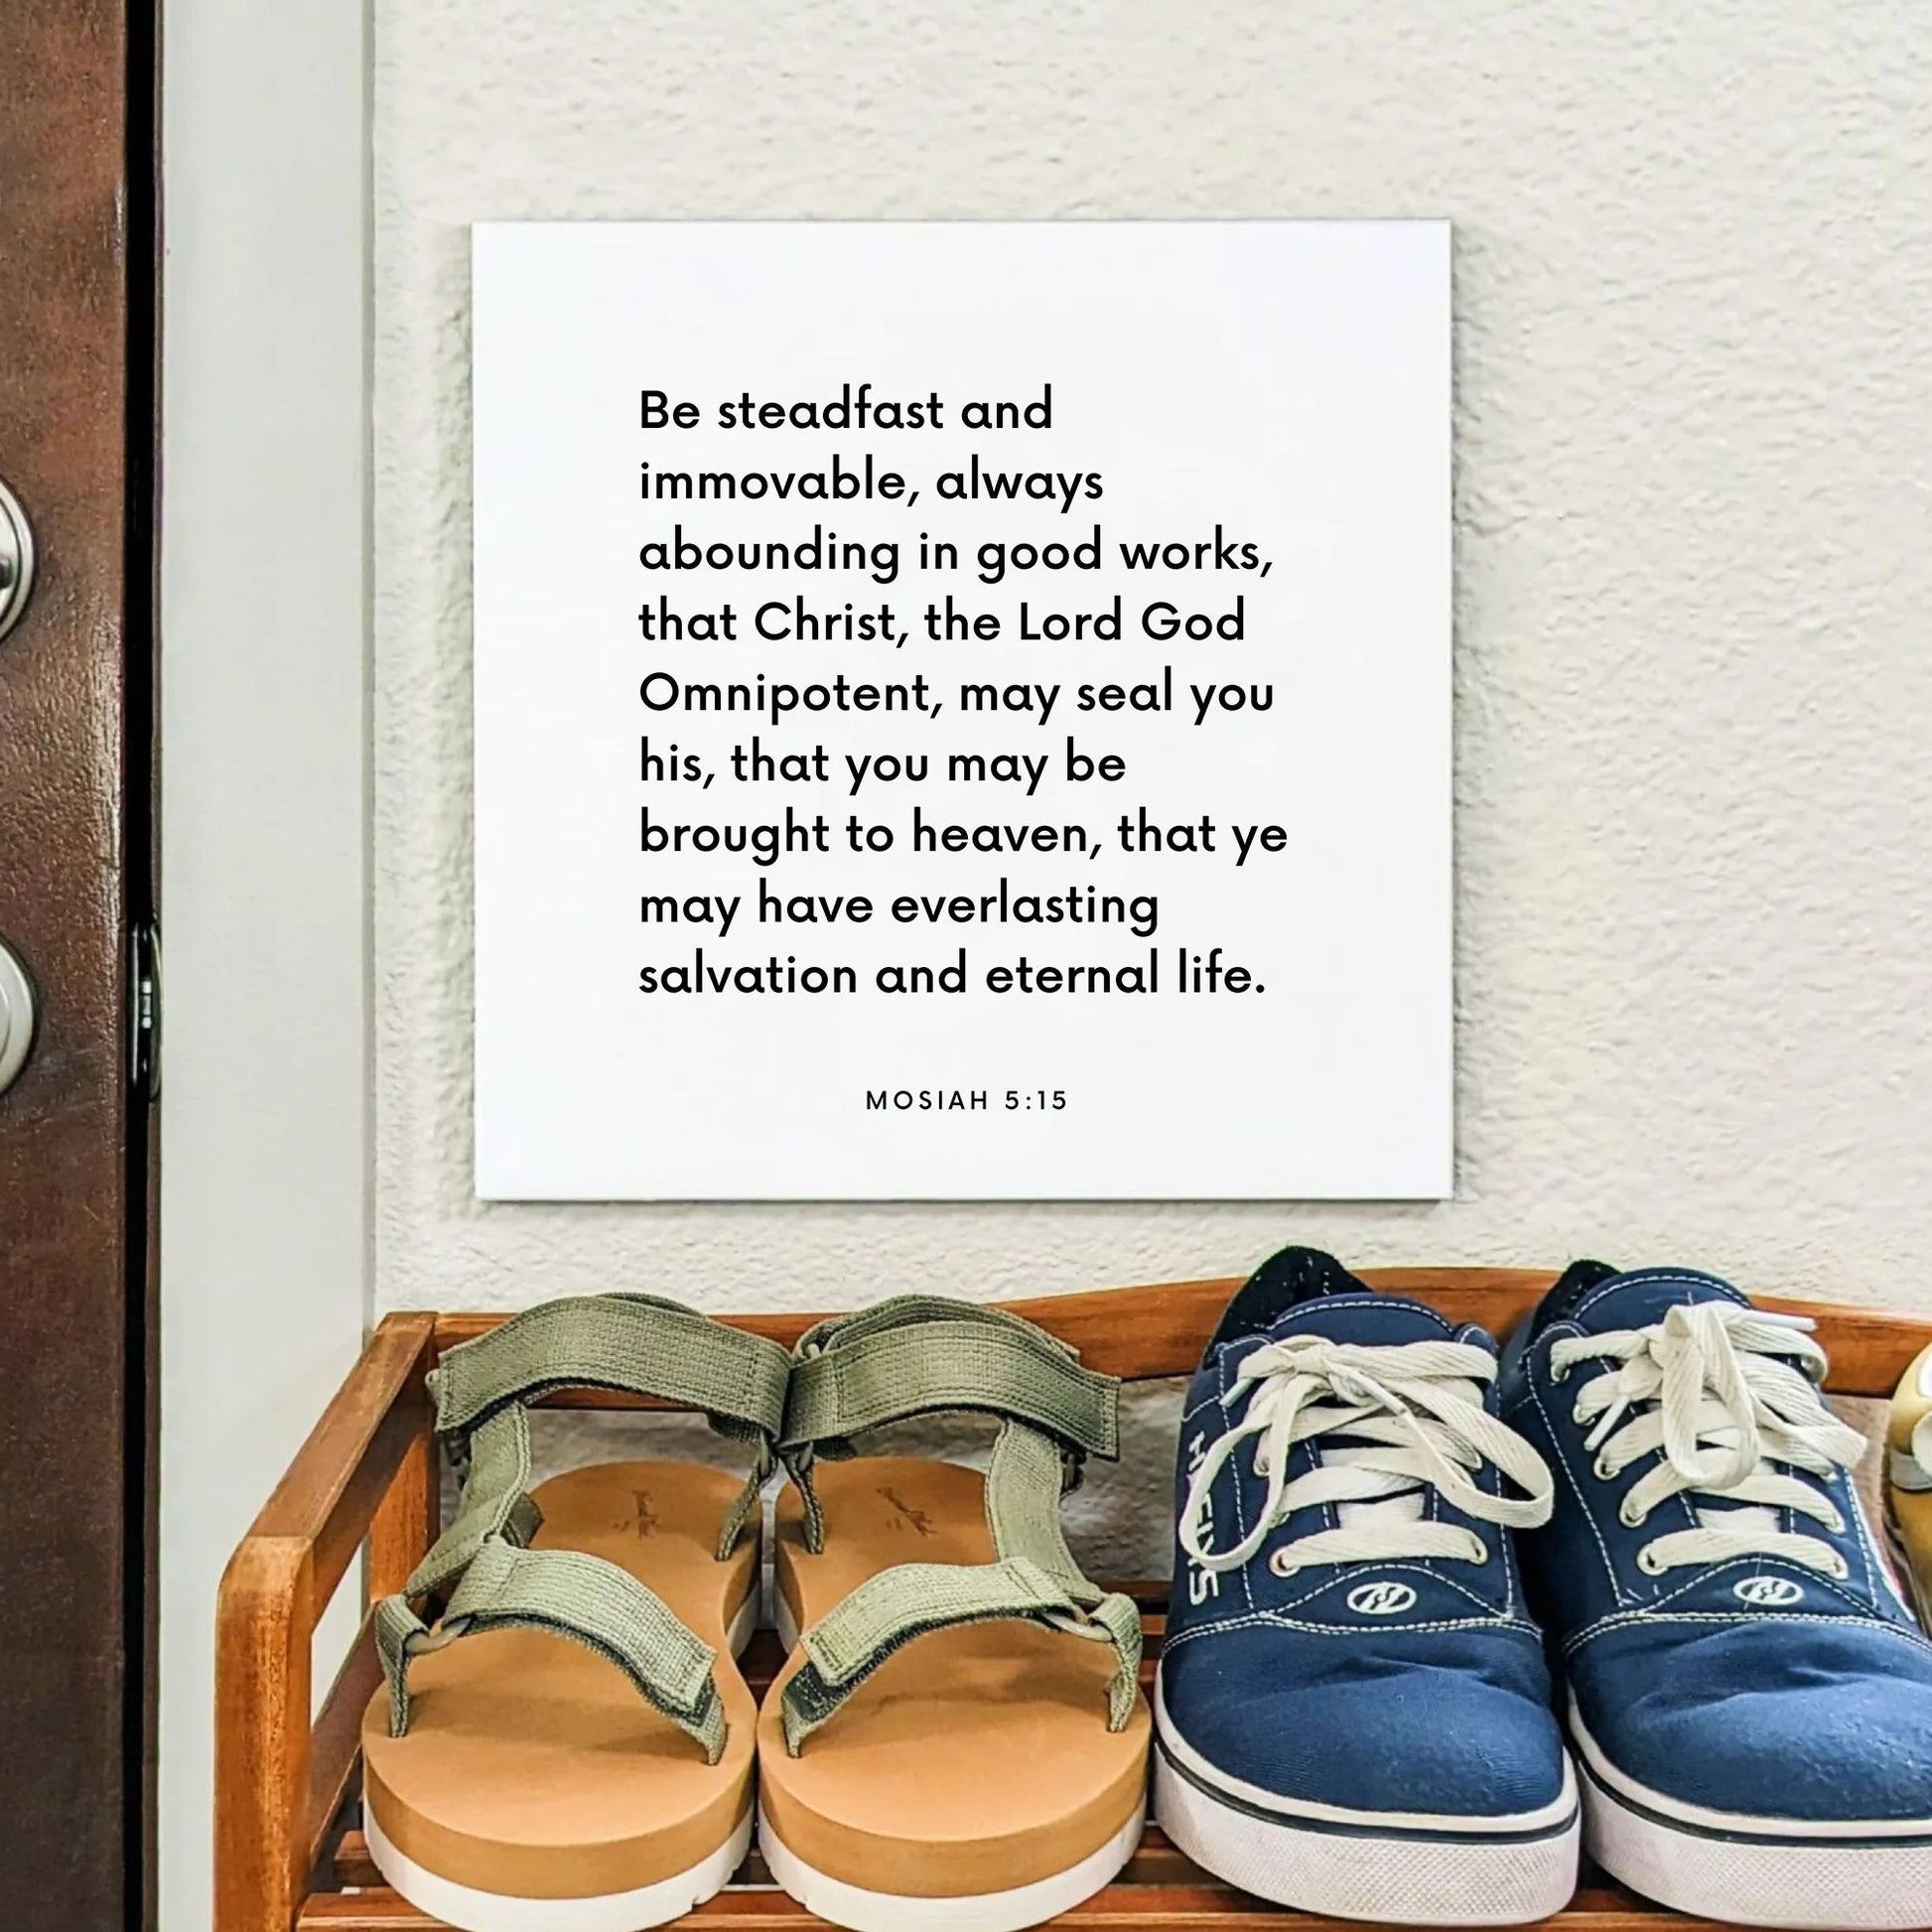 Shoes mouting of the scripture tile for Mosiah 5:15 - "Be steadfast and immovable, always abounding in good works"